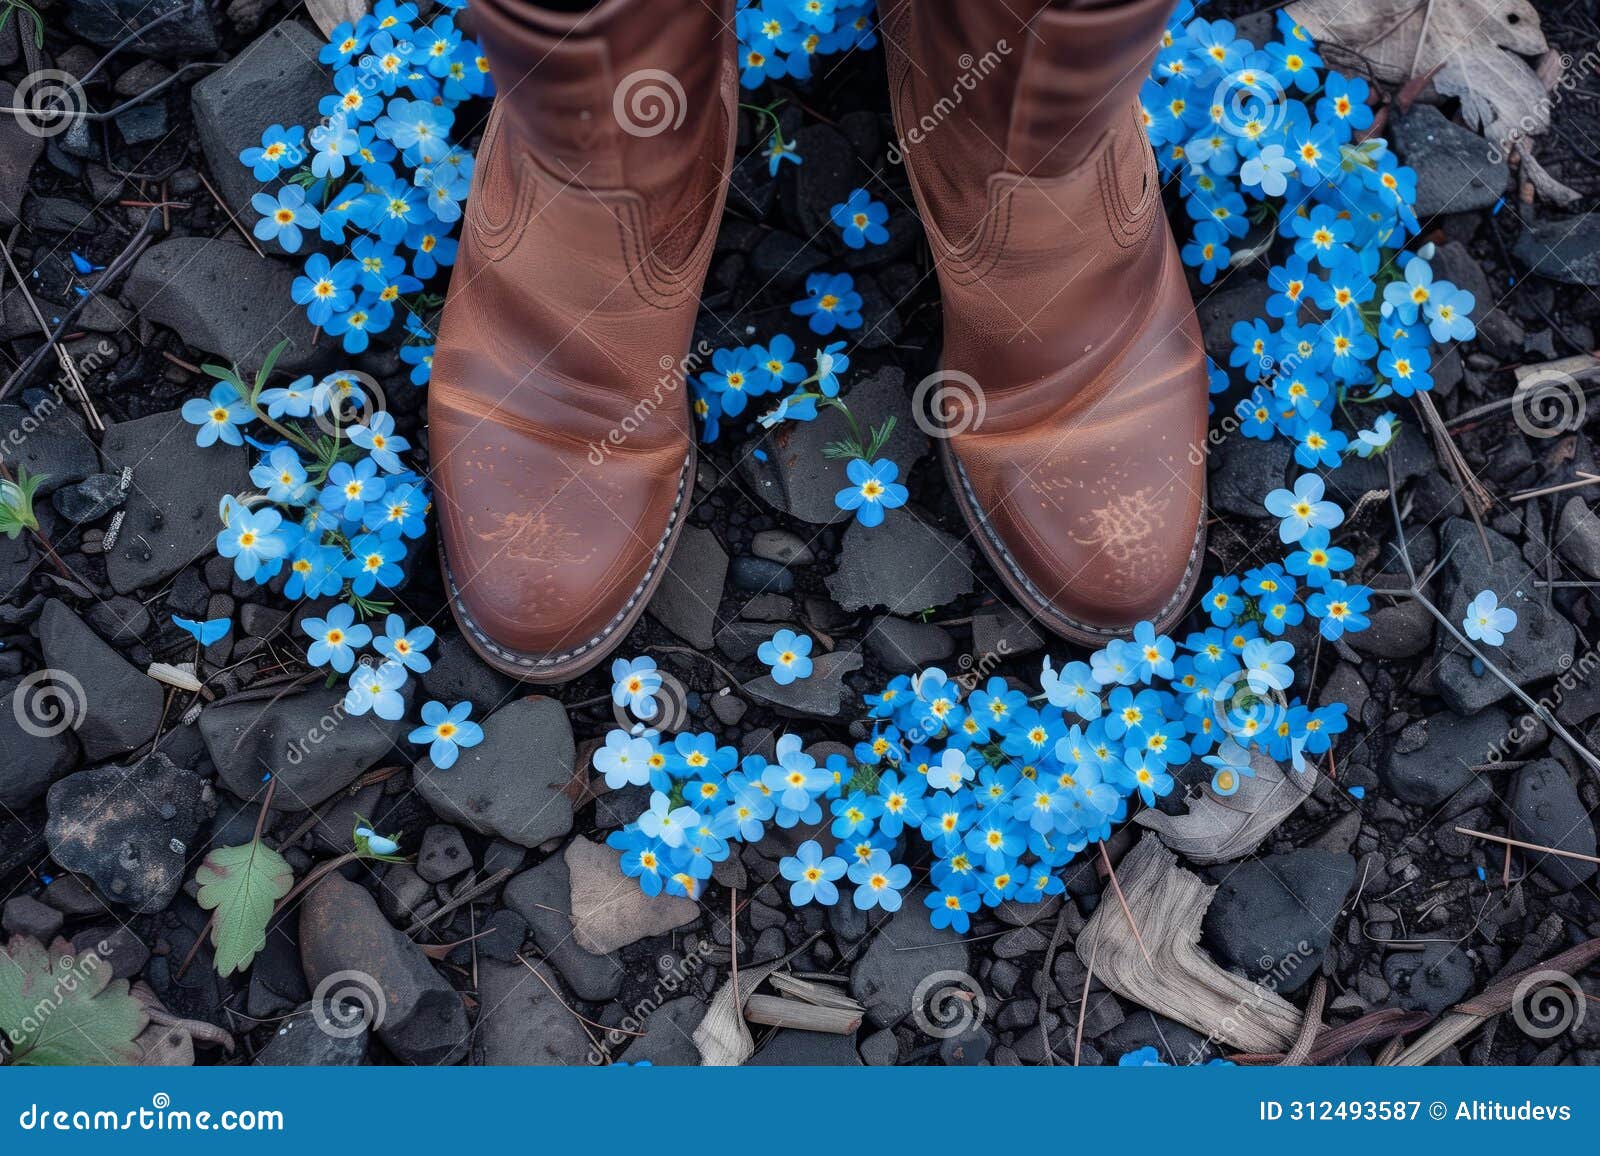 boots standing with a circle of forgetmenots